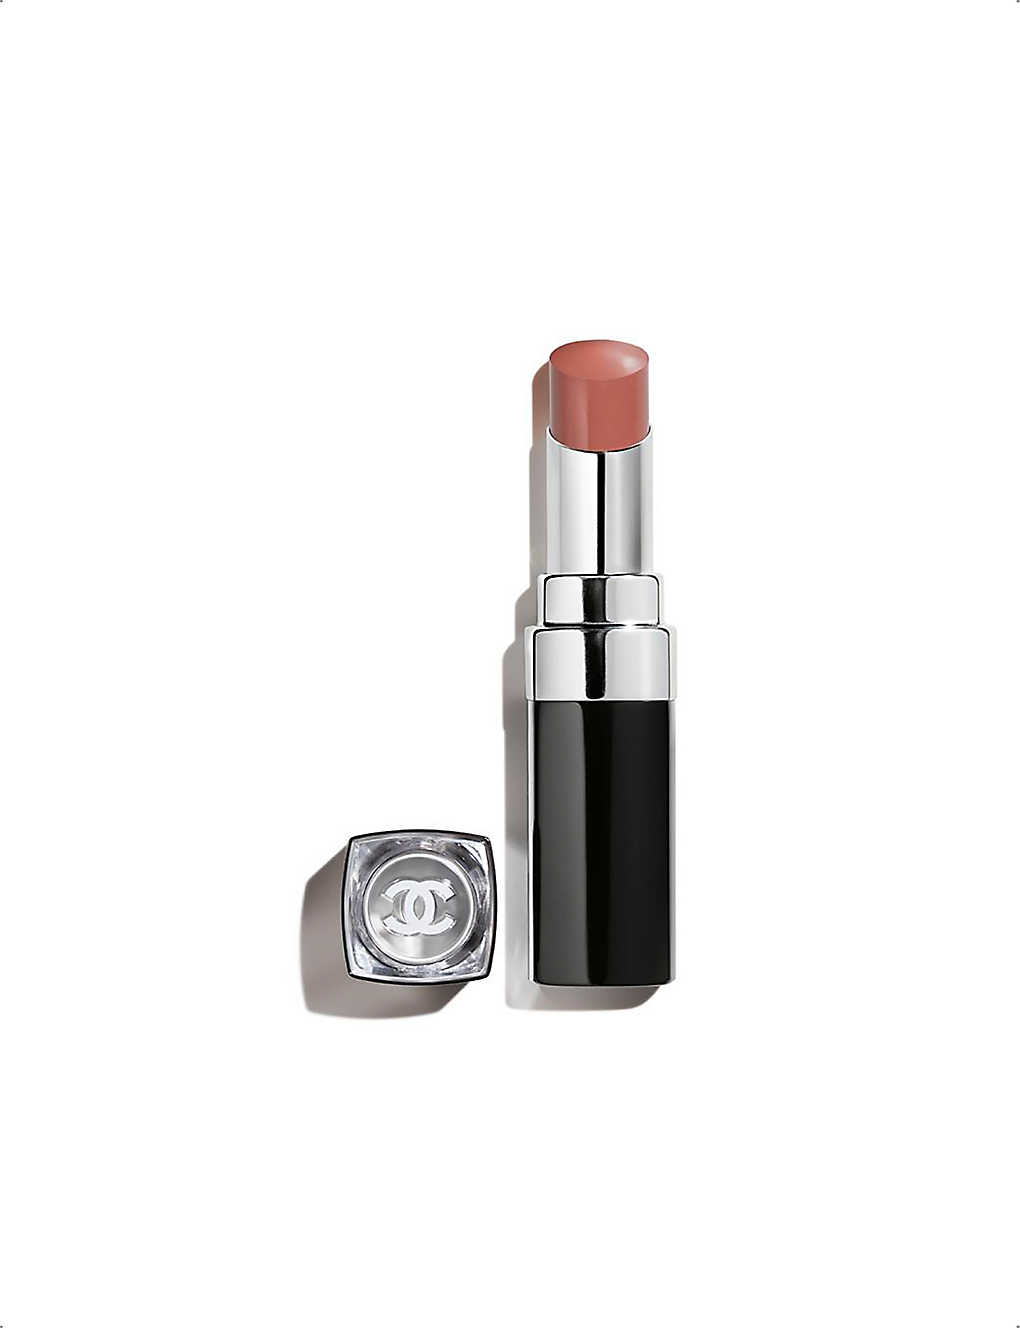 CHANEL - ROUGE COCO BLOOM Hydrating Plumping Intense Shine Lip Colour 3g